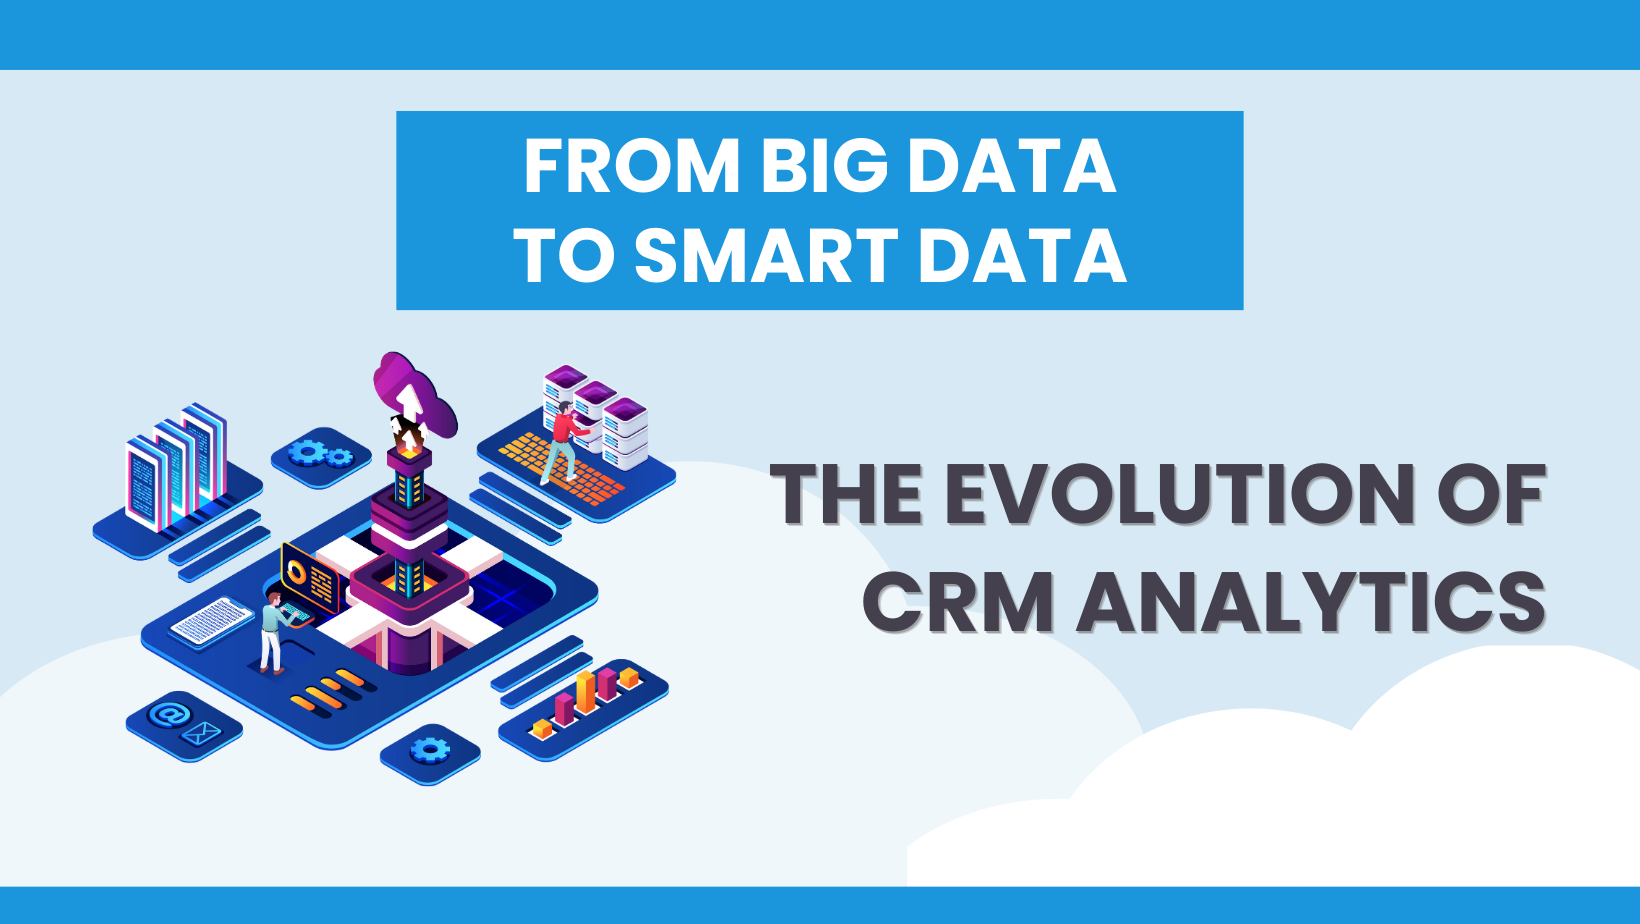 From Big Data to Smart Data: The Evolution of CRM Analytics